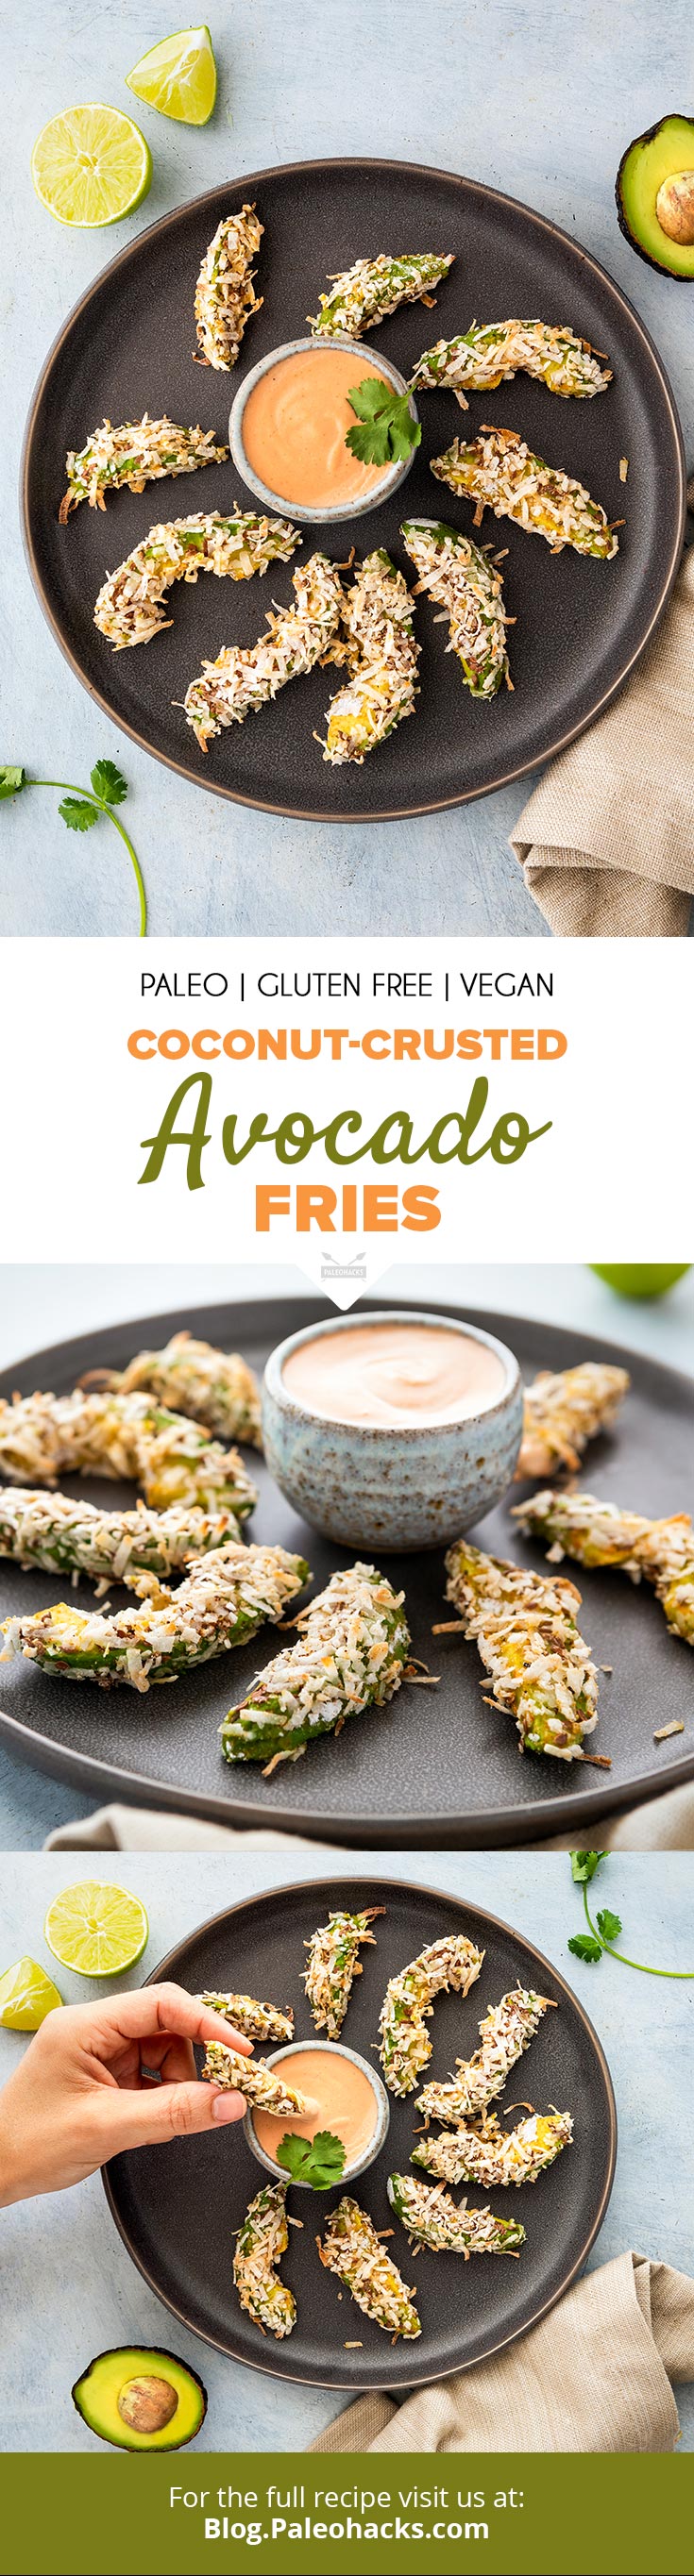 Want a creamy but crunchy side dish? These Coconut-Crusted Avocado Fries are light, healthy, gluten-free, dairy-free, egg-free and totally scrumptious.